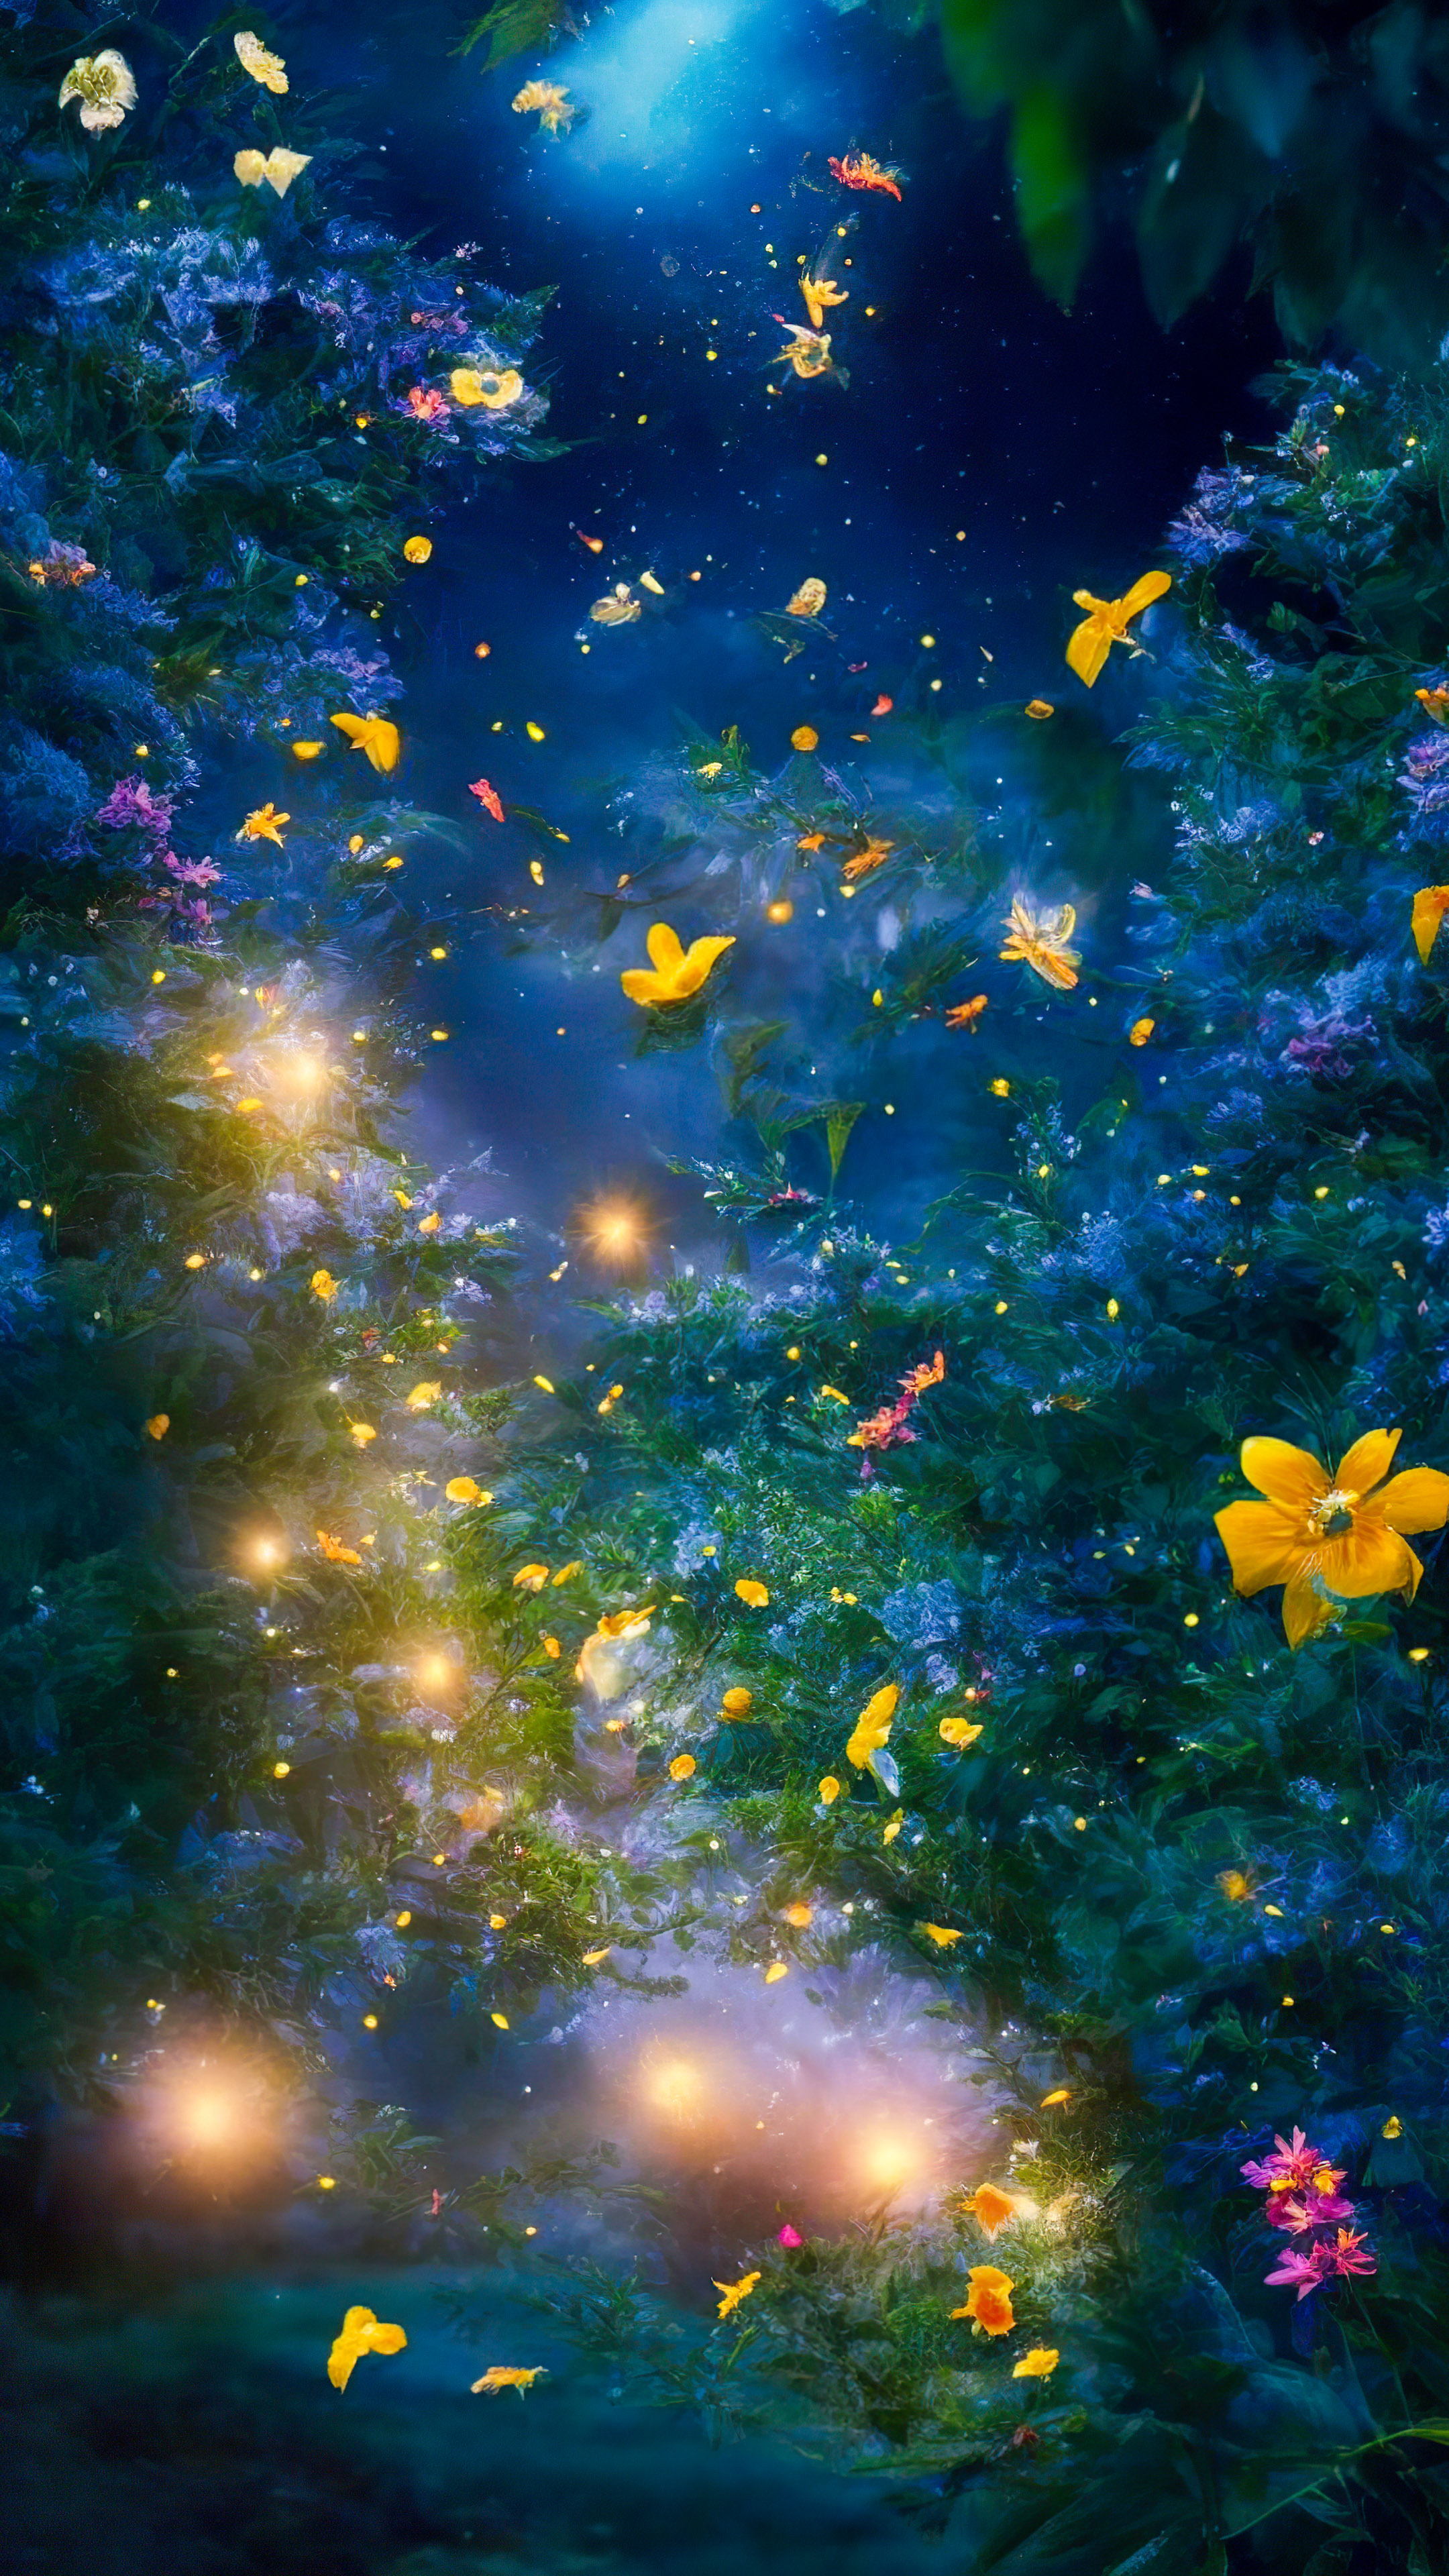 Experience the whimsy of aesthetic night sky background, featuring a magical and whimsical garden at night, where fireflies dance around vibrant, luminescent flowers.